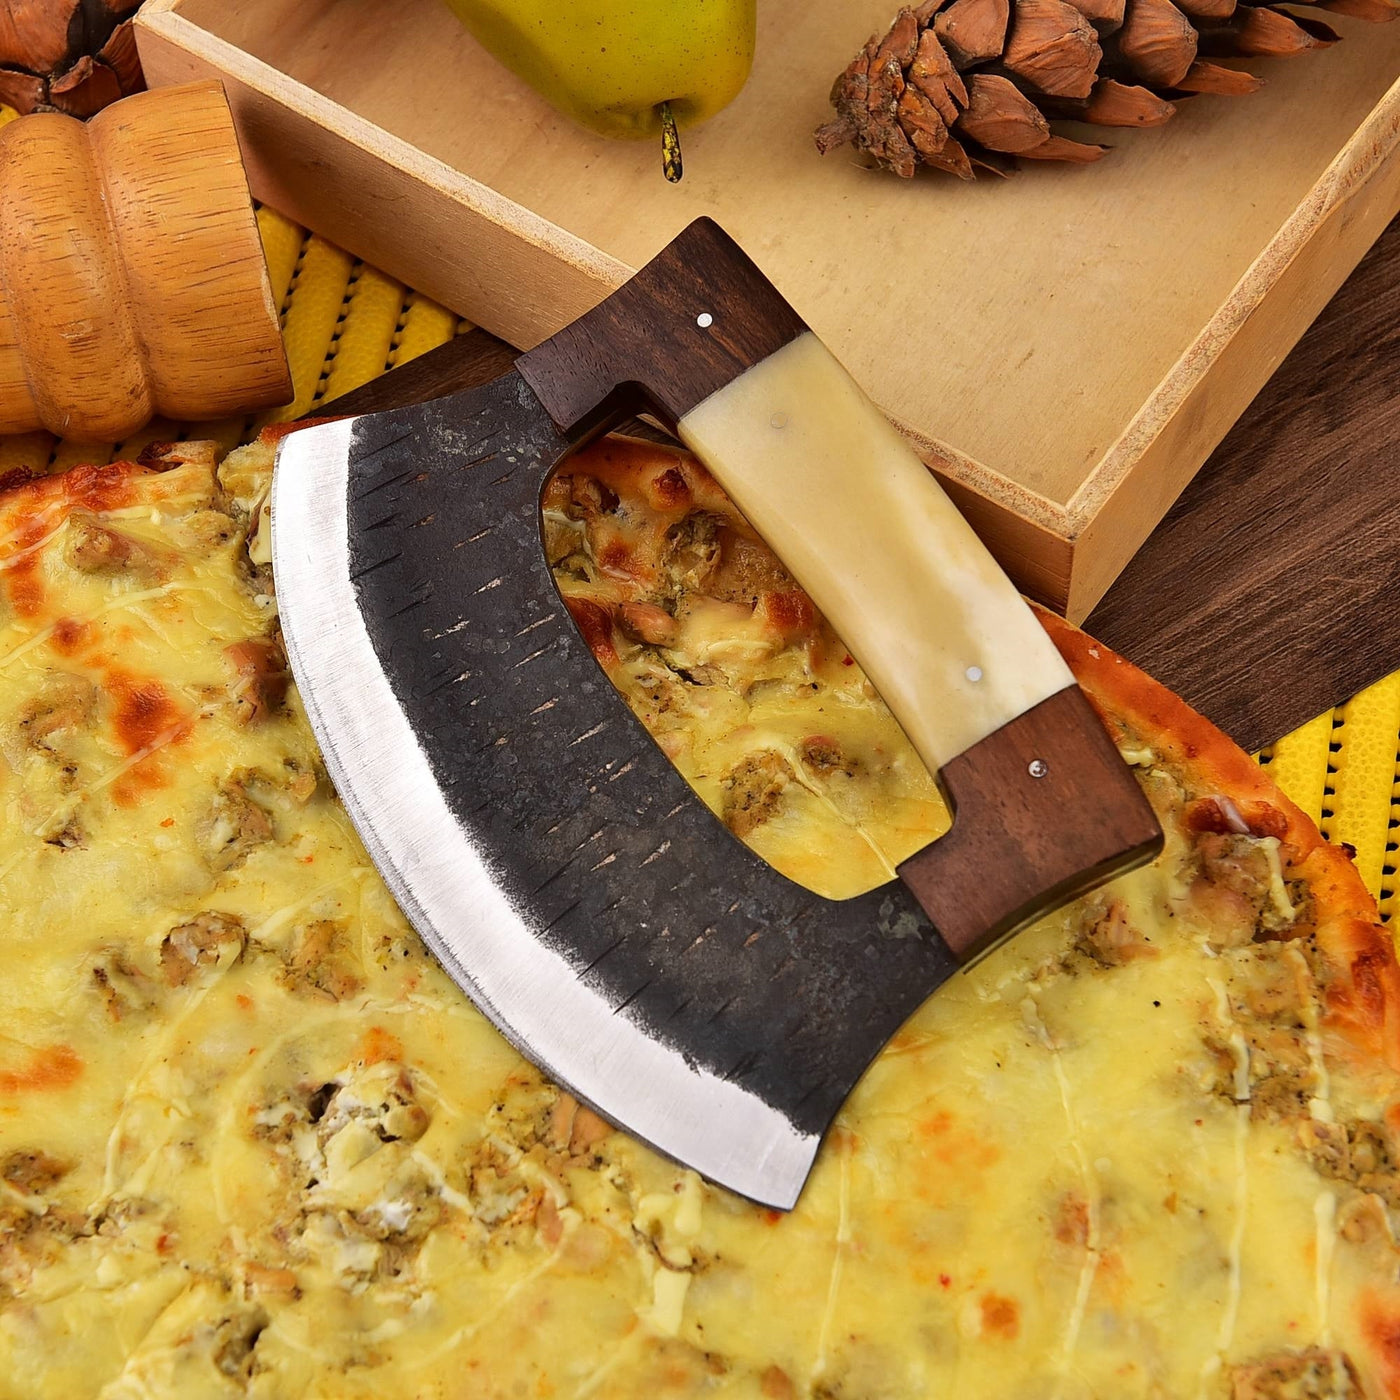 Carbon Steel Pizza Cutter